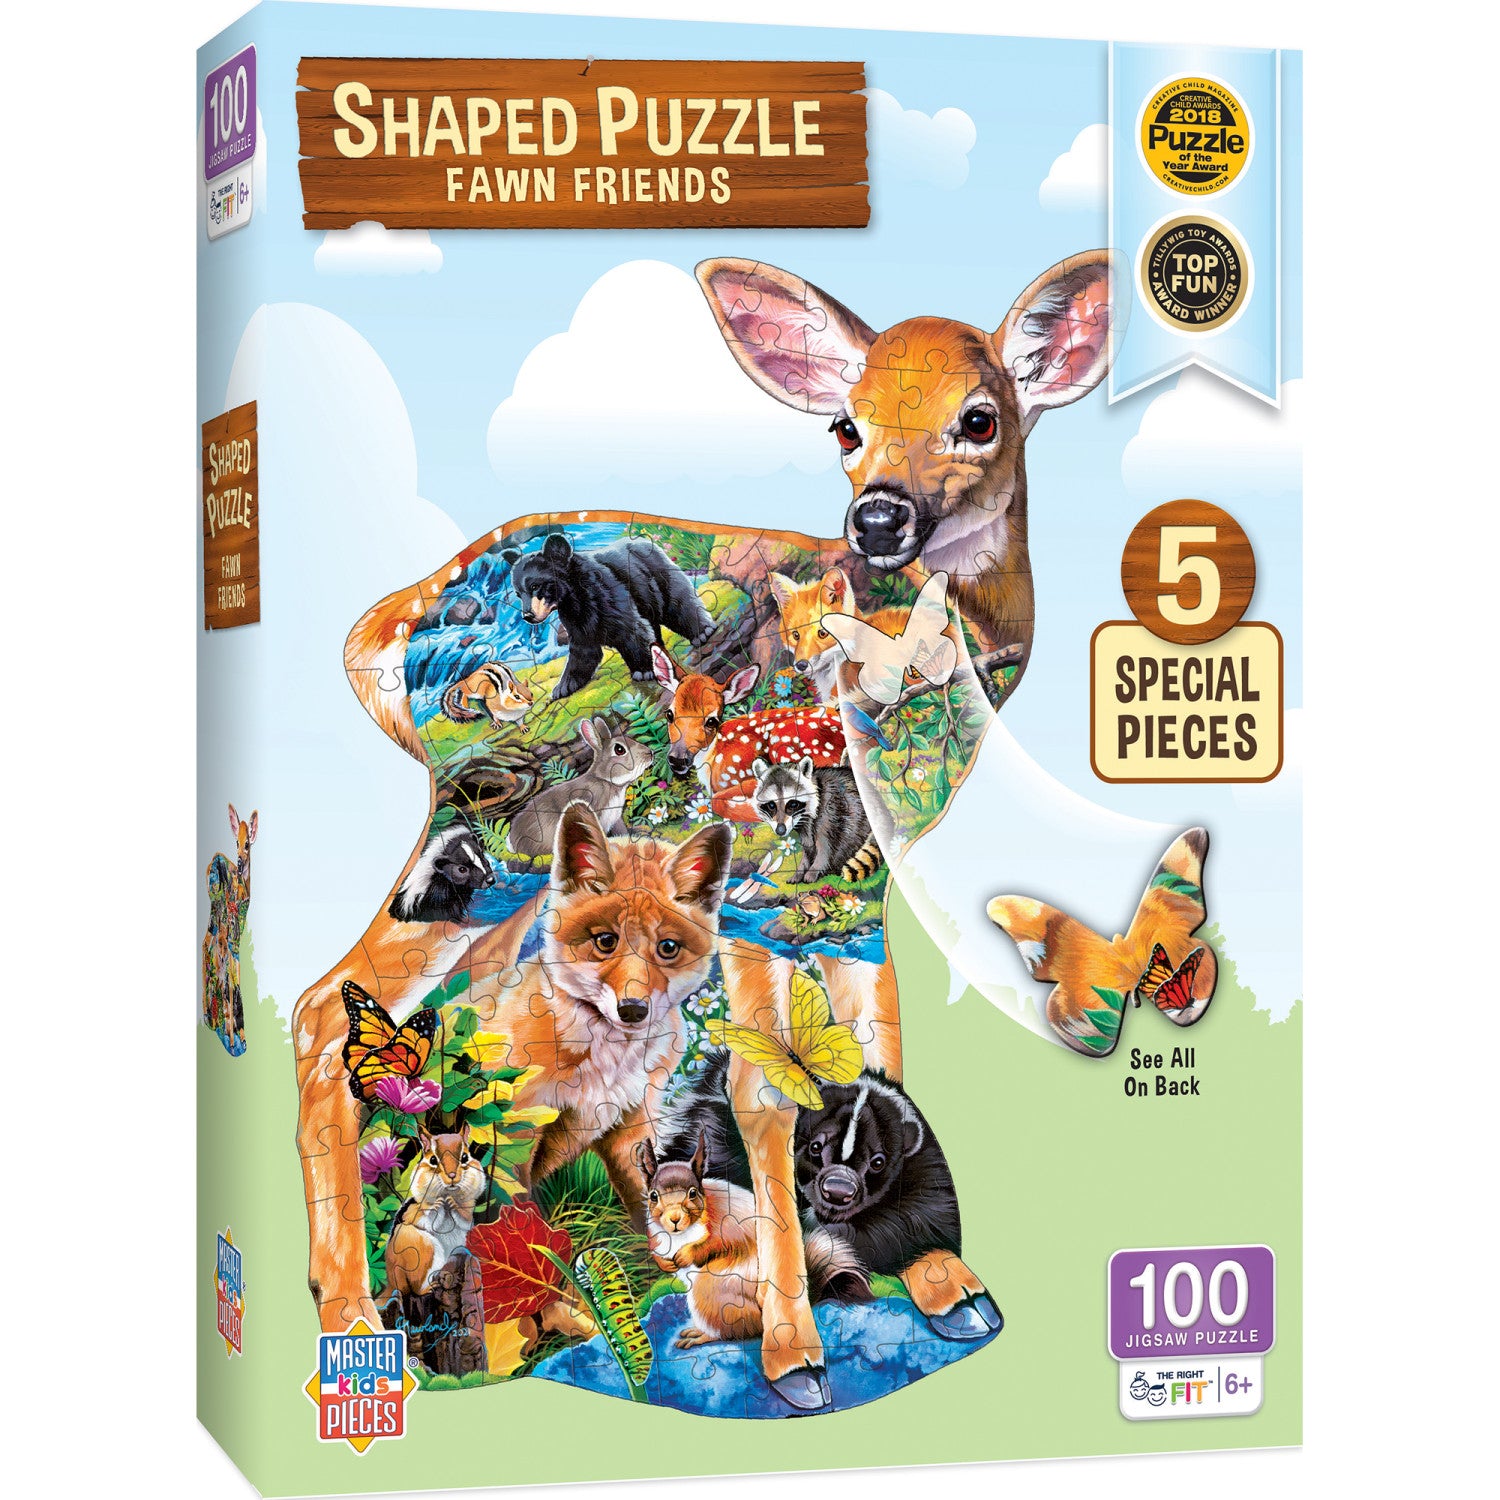 Fawn Friends - 100 Piece Shaped Puzzle